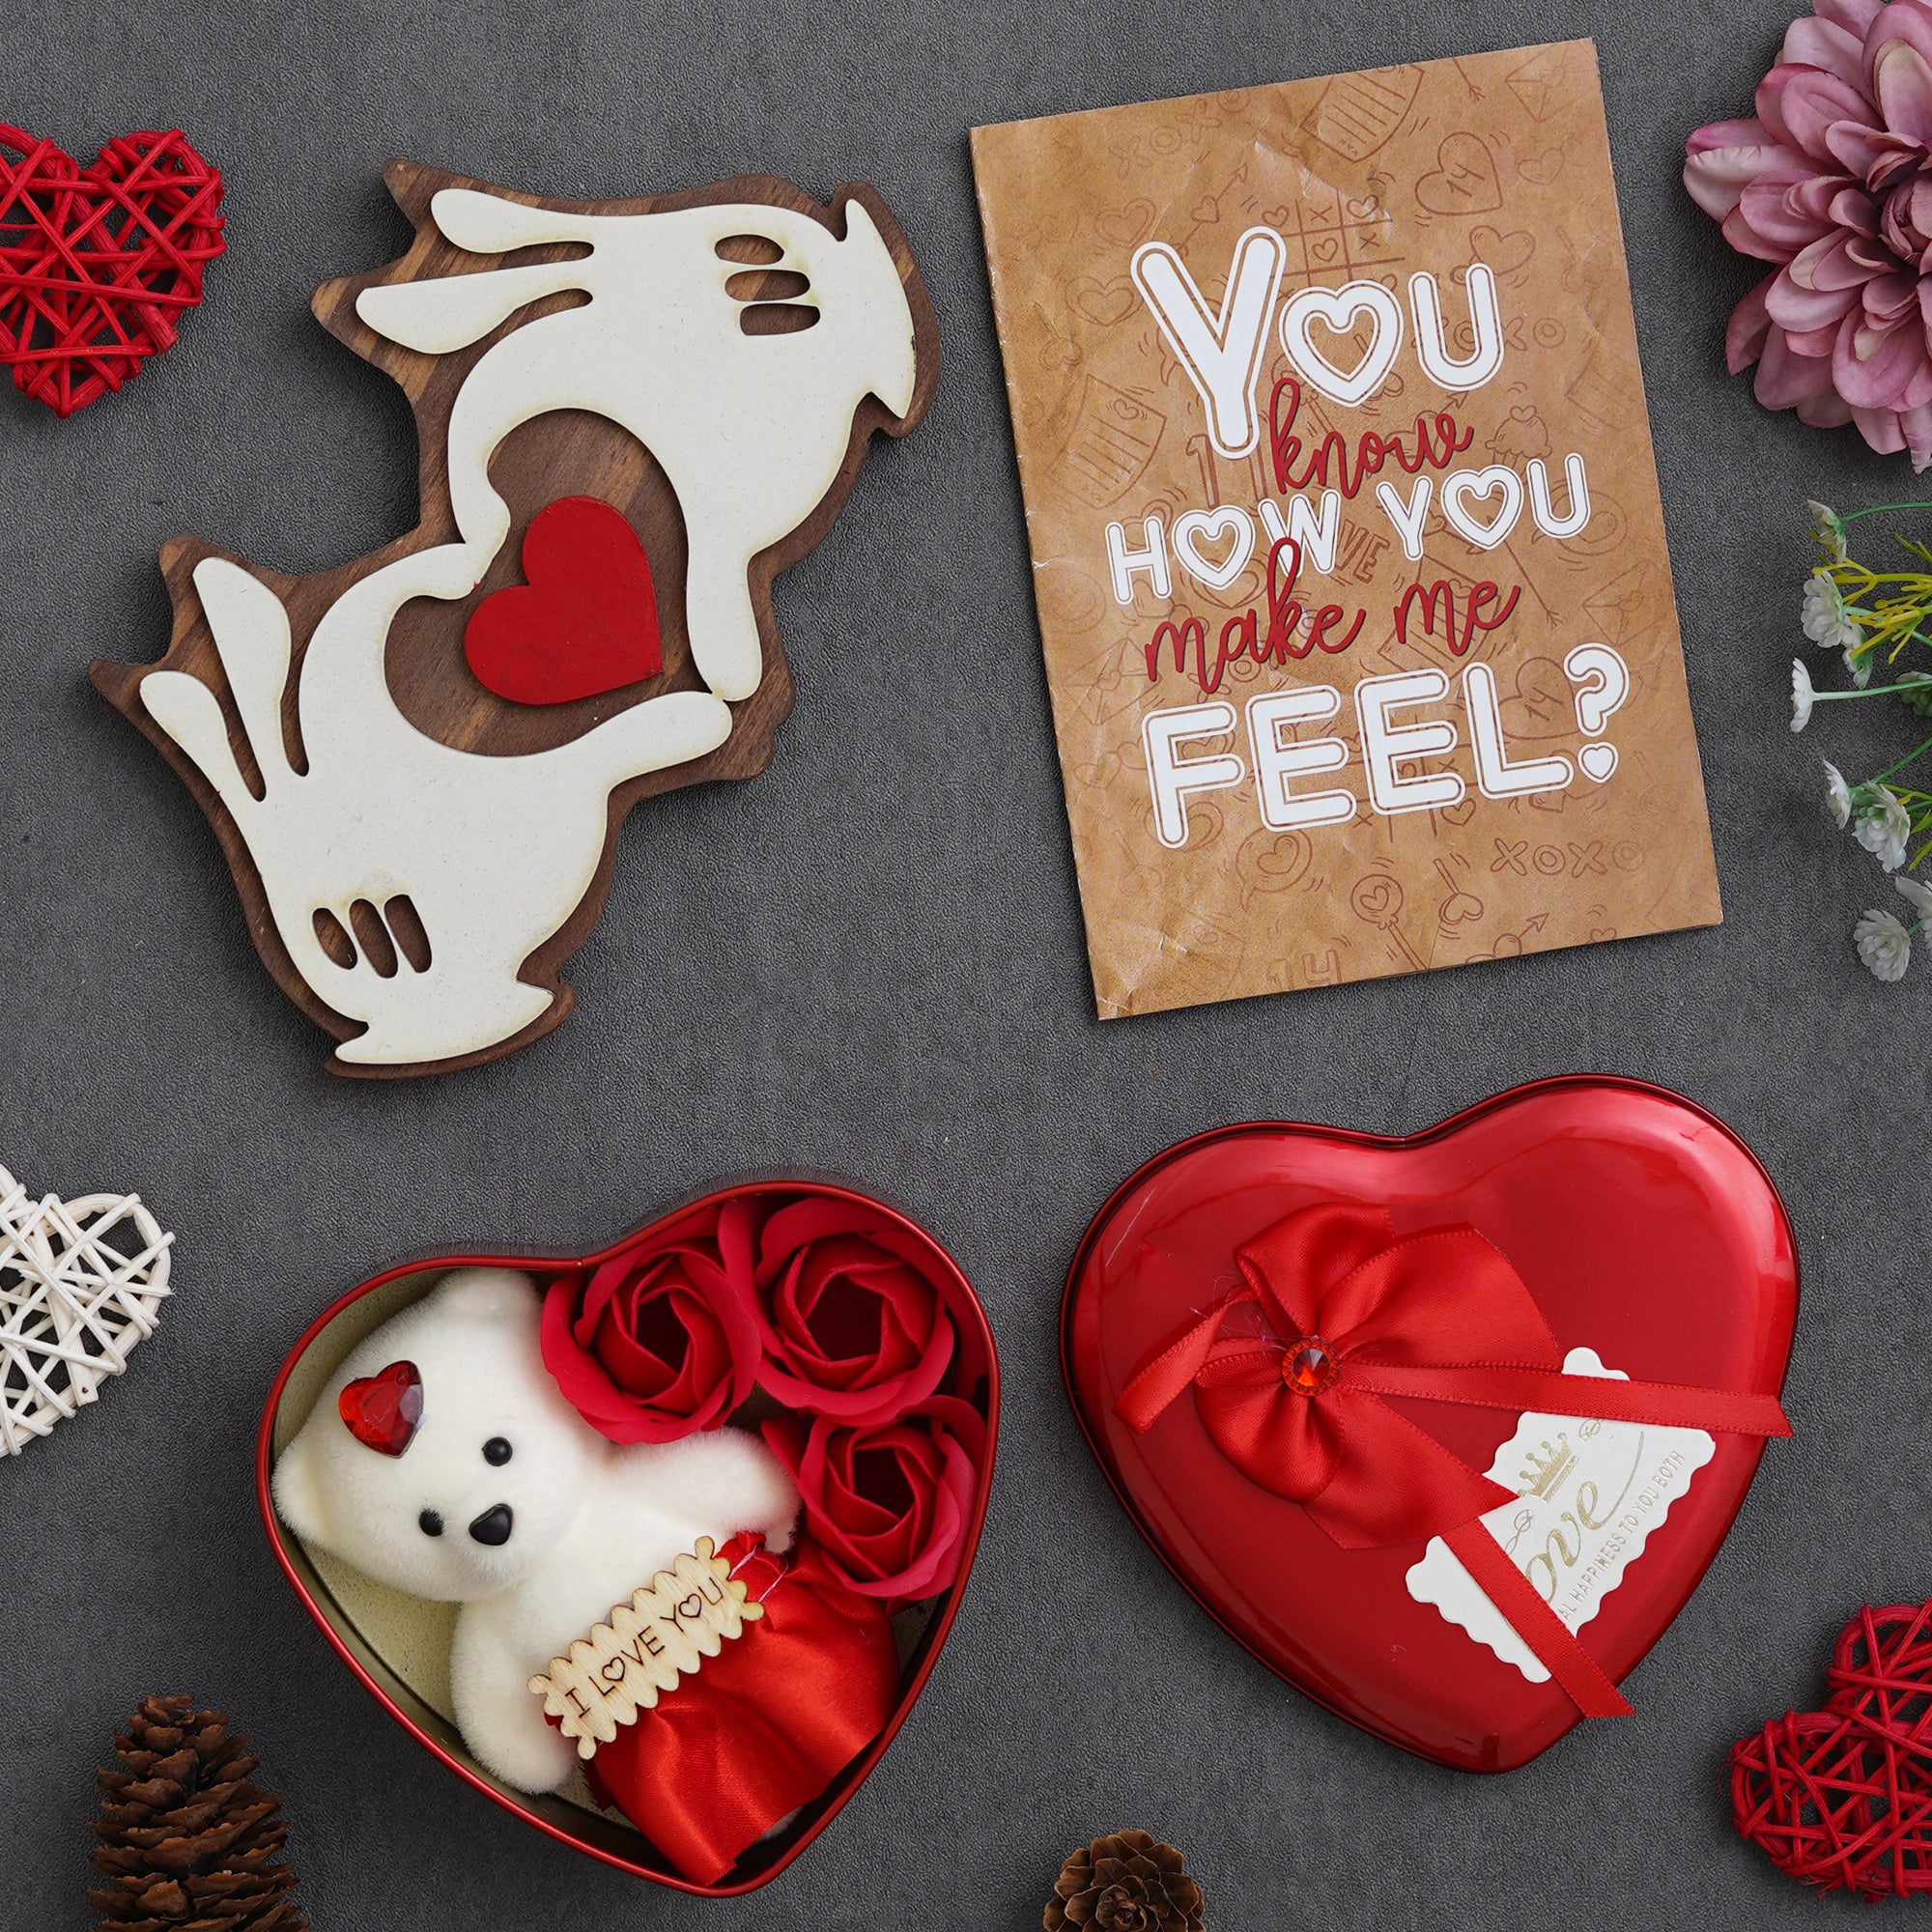 Valentine Combo of Card, Heart Shaped Gift Box Set with White Teddy and Red Roses, Hands Showcasing Red Heart Gift Set